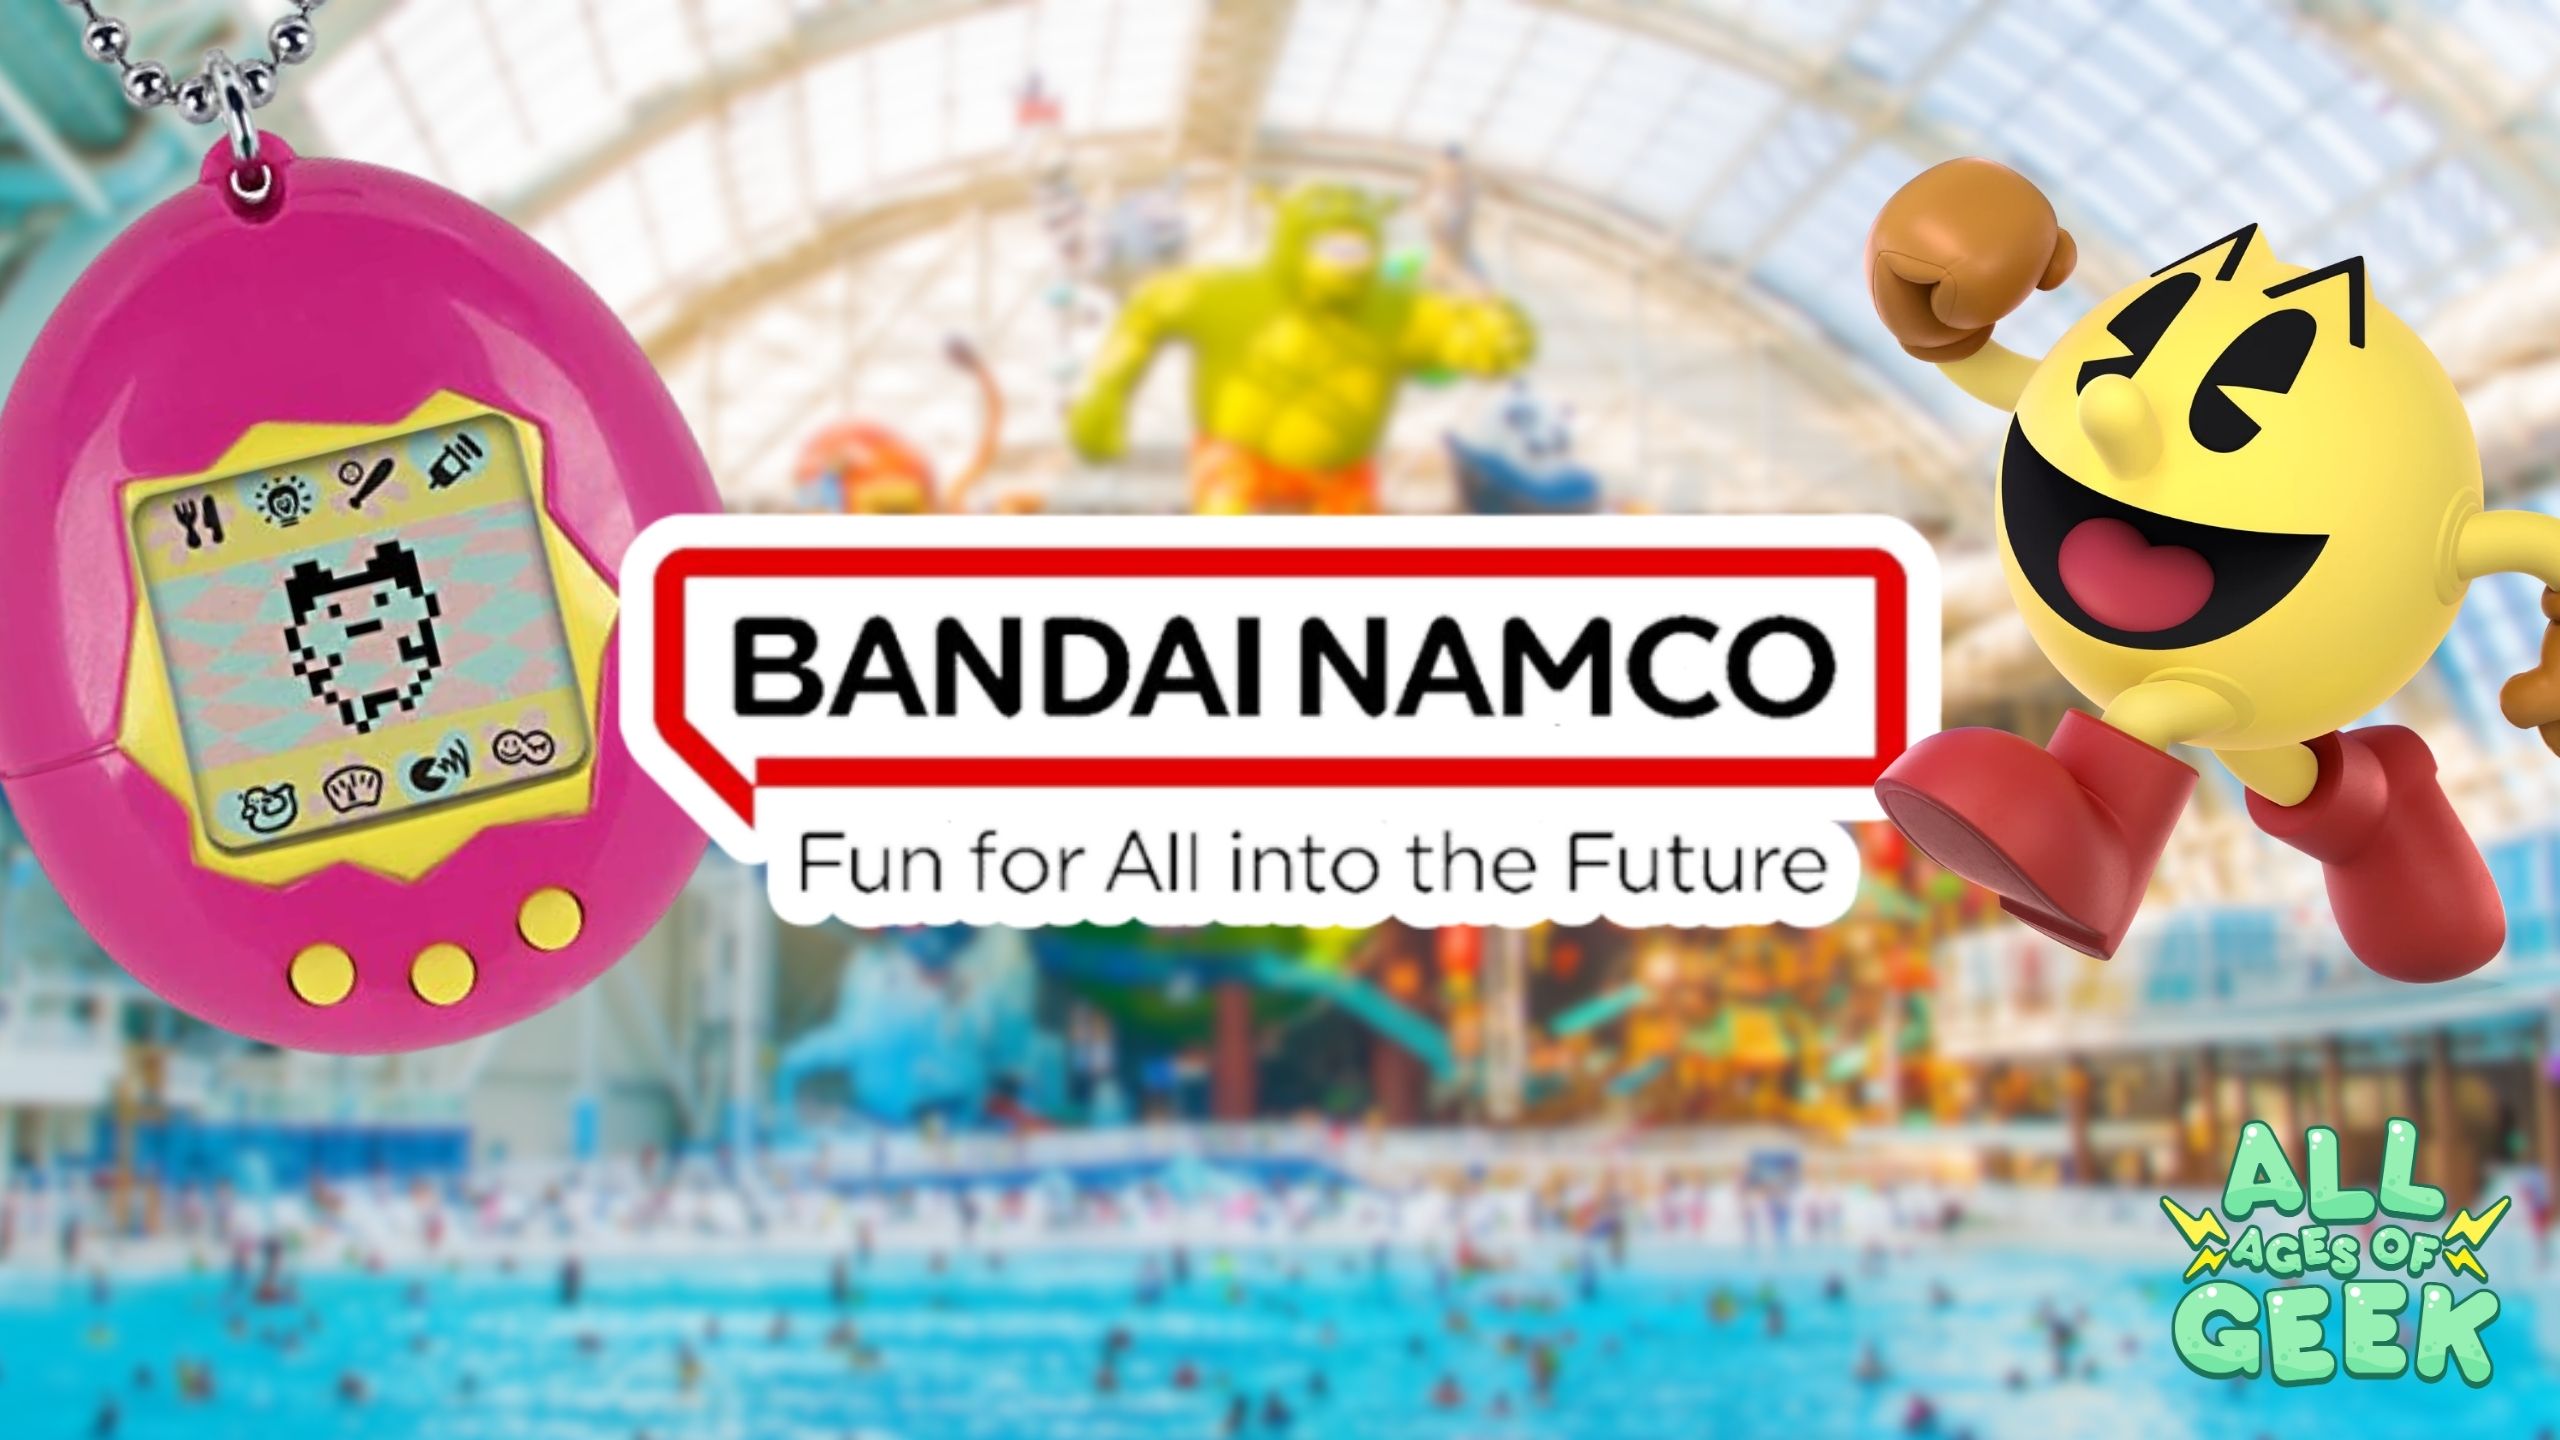 Bandai Namco Brings Iconic Brands to Life at New Jersey’s American Dream Mall